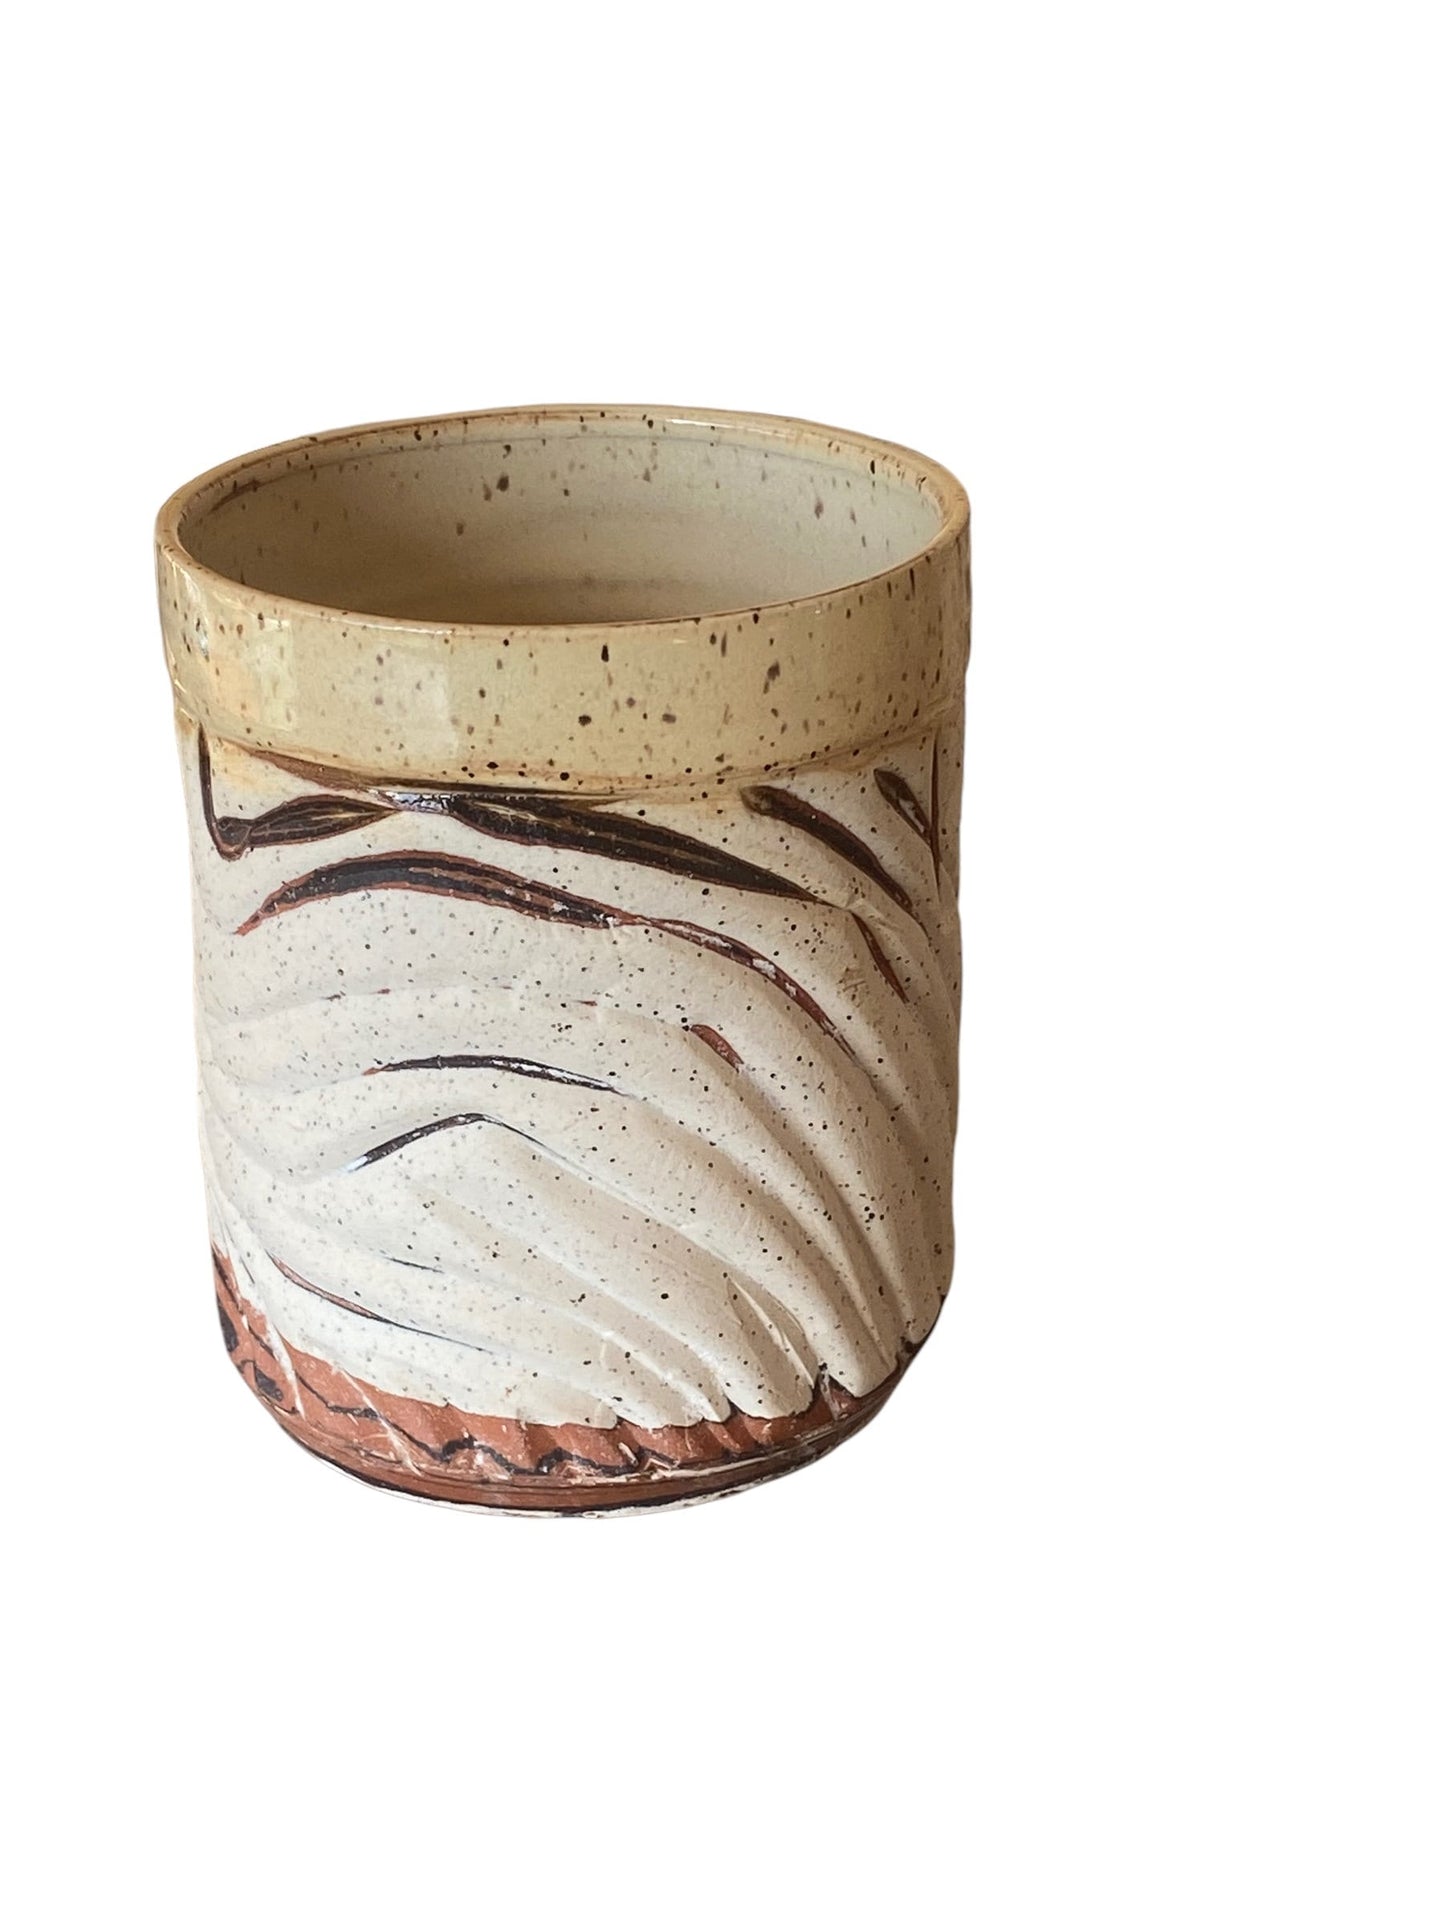 Unique Handless Agateware Pottery Mug: Artisan-Crafted Elegance for Your Daily Brew